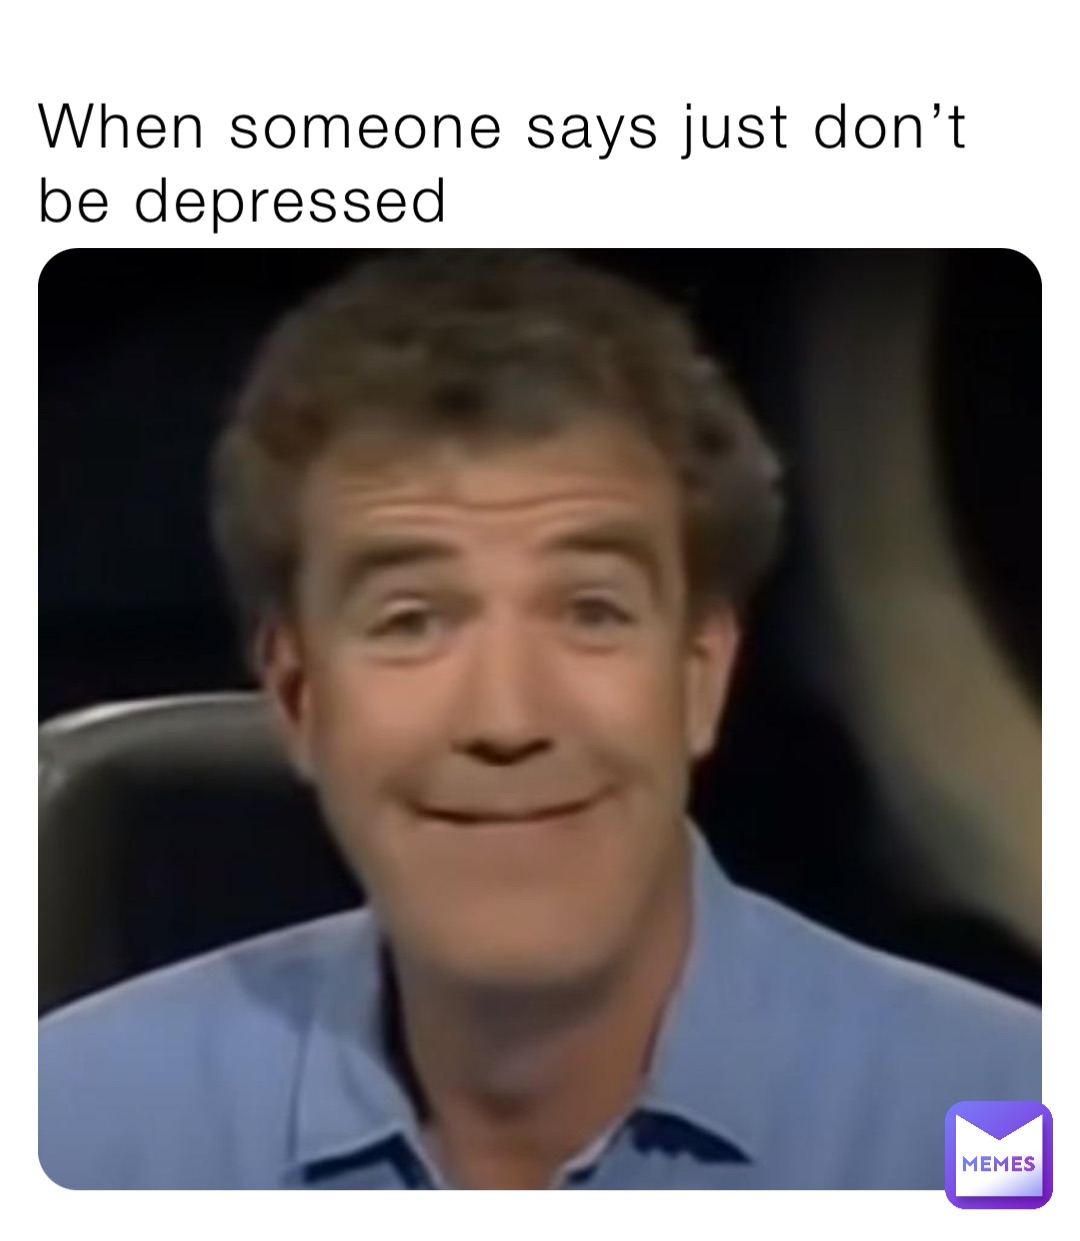 When someone says just don’t be depressed